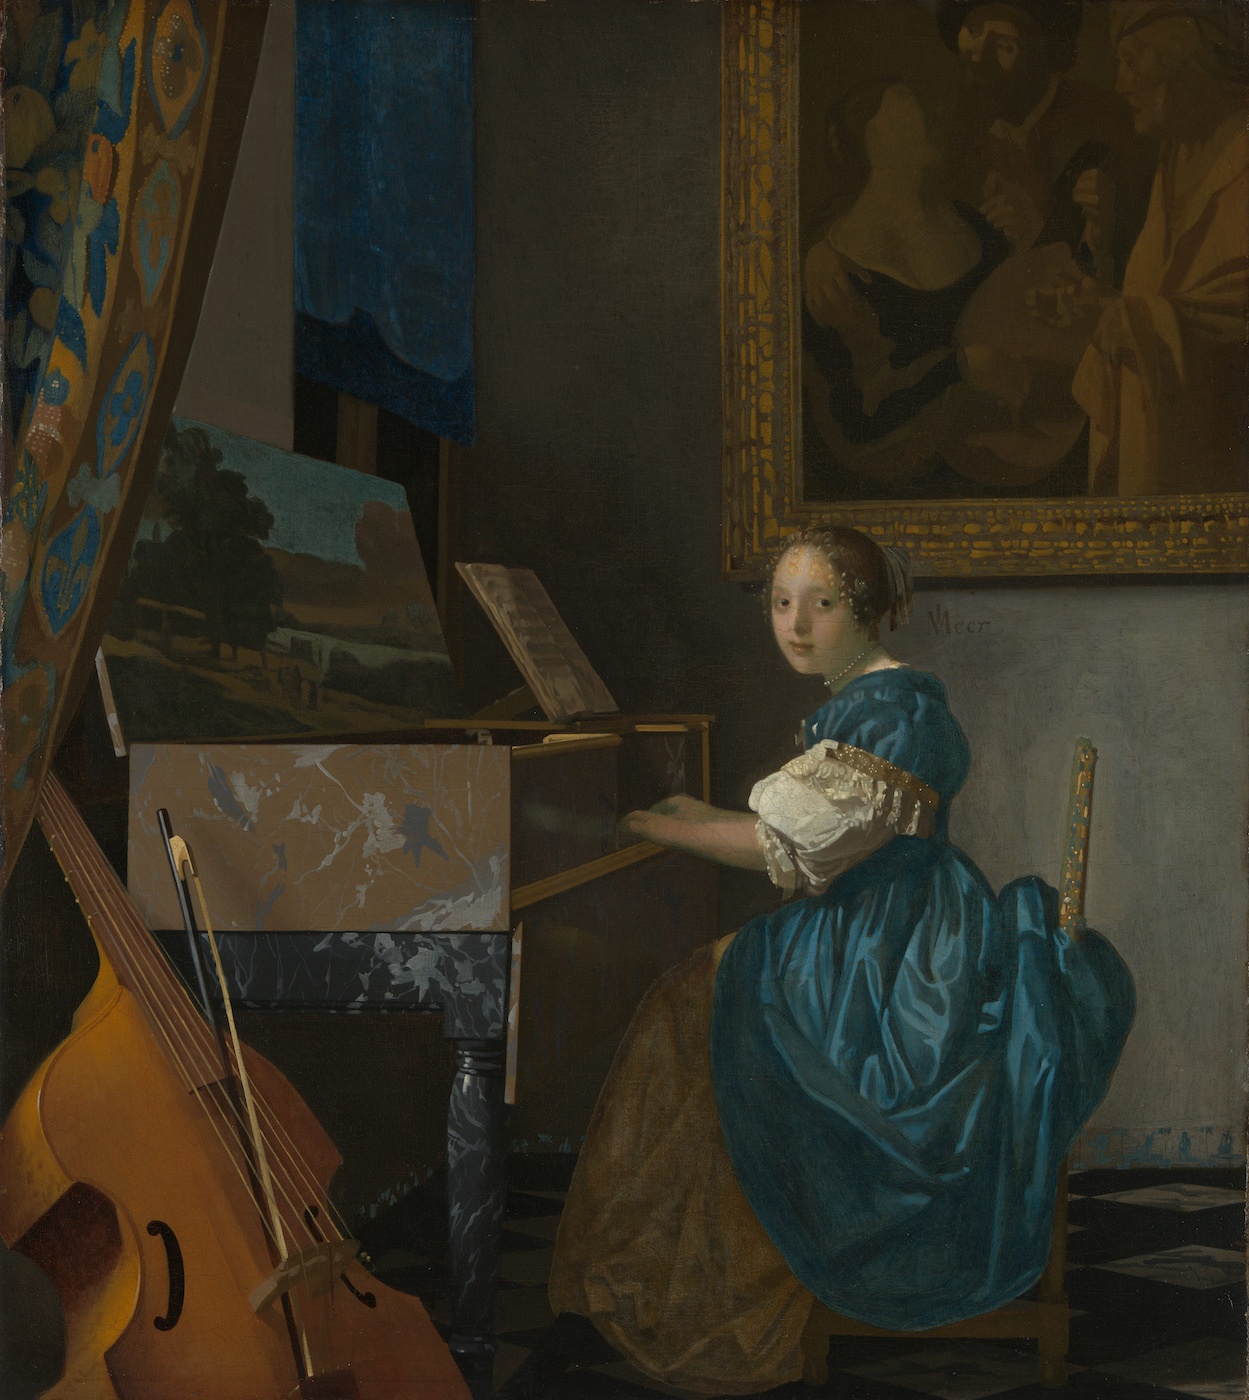 Johannes Vermeer, "A Young Woman Seated at a Virginal" (1670-72), oil on canvas. Lapis lazuli used in the curtain, to highlight the woman's arms, and mixed with green earth for the blue-green of the dress. (via National Gallery, London/Wikimedia)